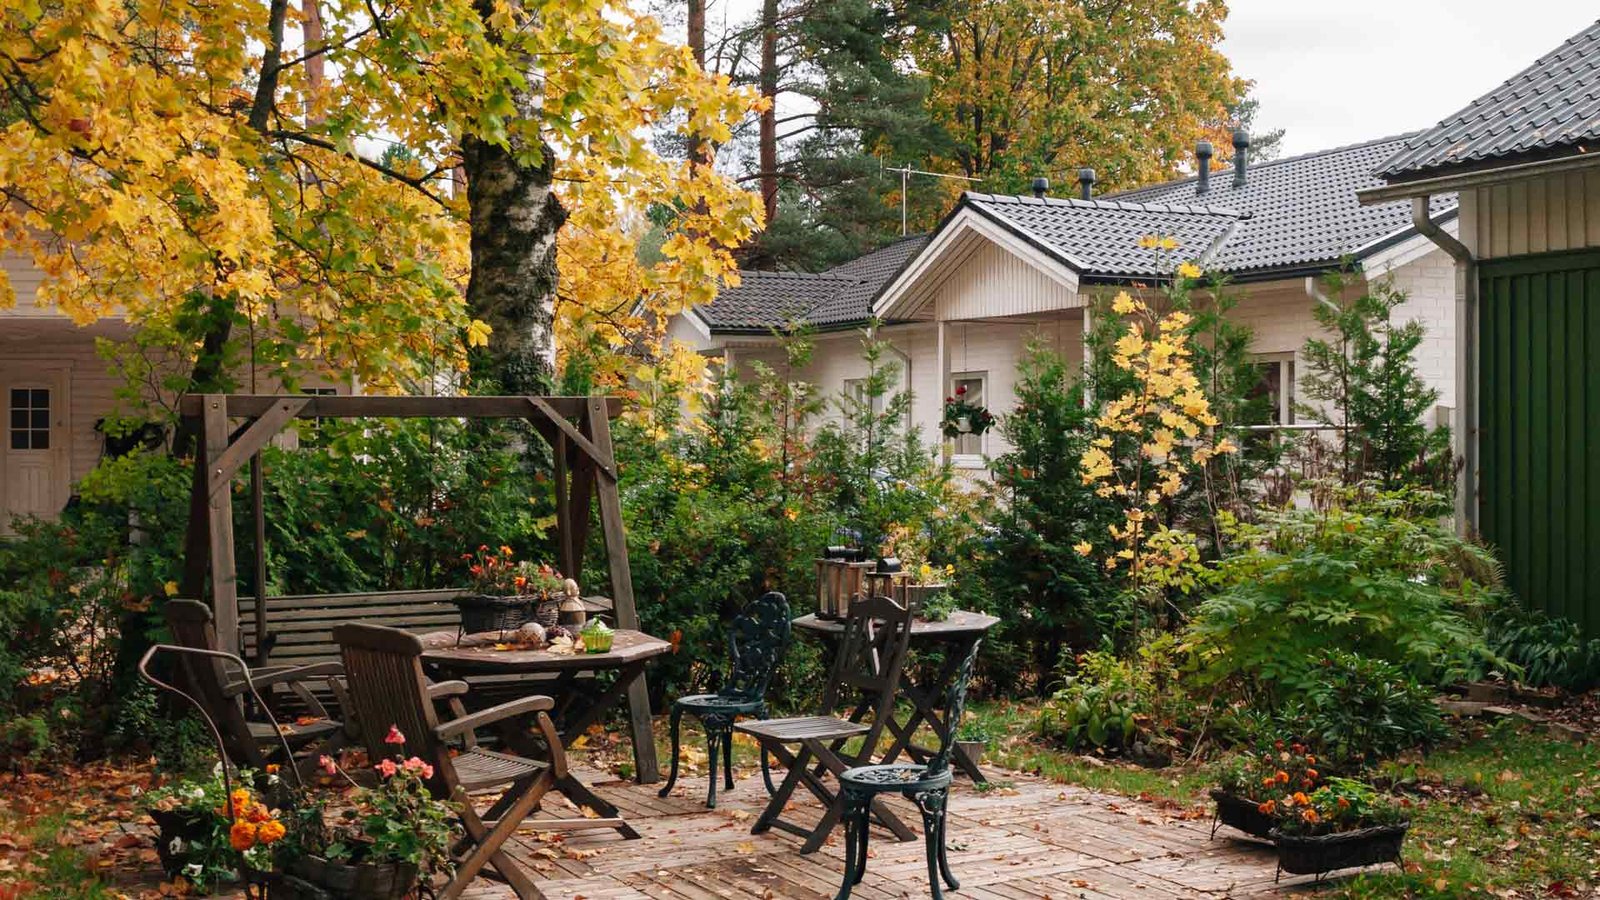 4 Season Garden Room Design Ideas to Bring the Fall Beauty to Your Home